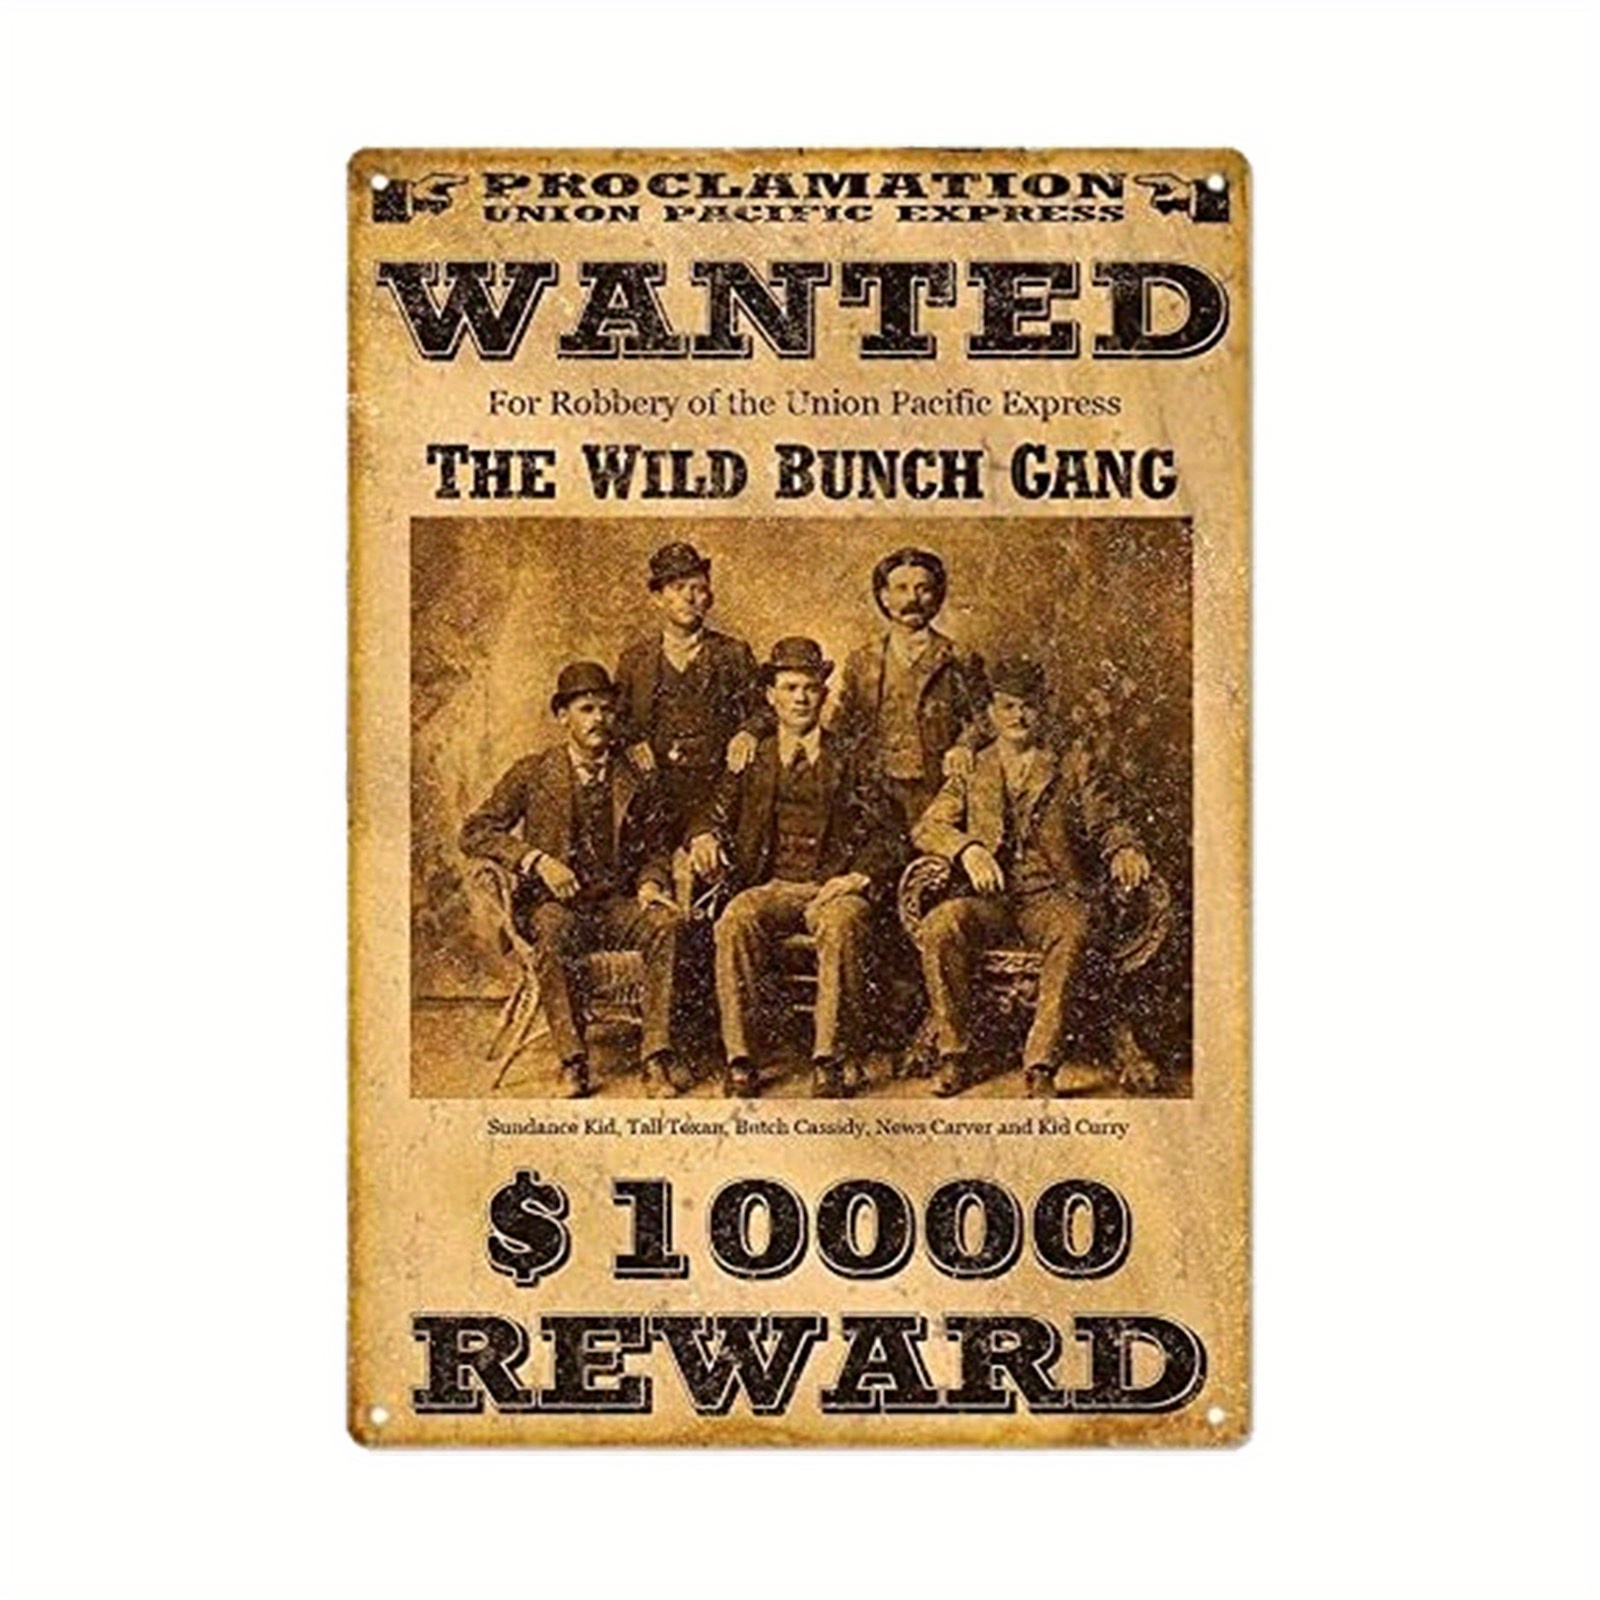 

Vintage Gang Wanted Poster Metal Sign - Iron Art Reproduction 12"x8", Pre-drilled, Weatherproof, Robbery Of Express Themed Wall Decor